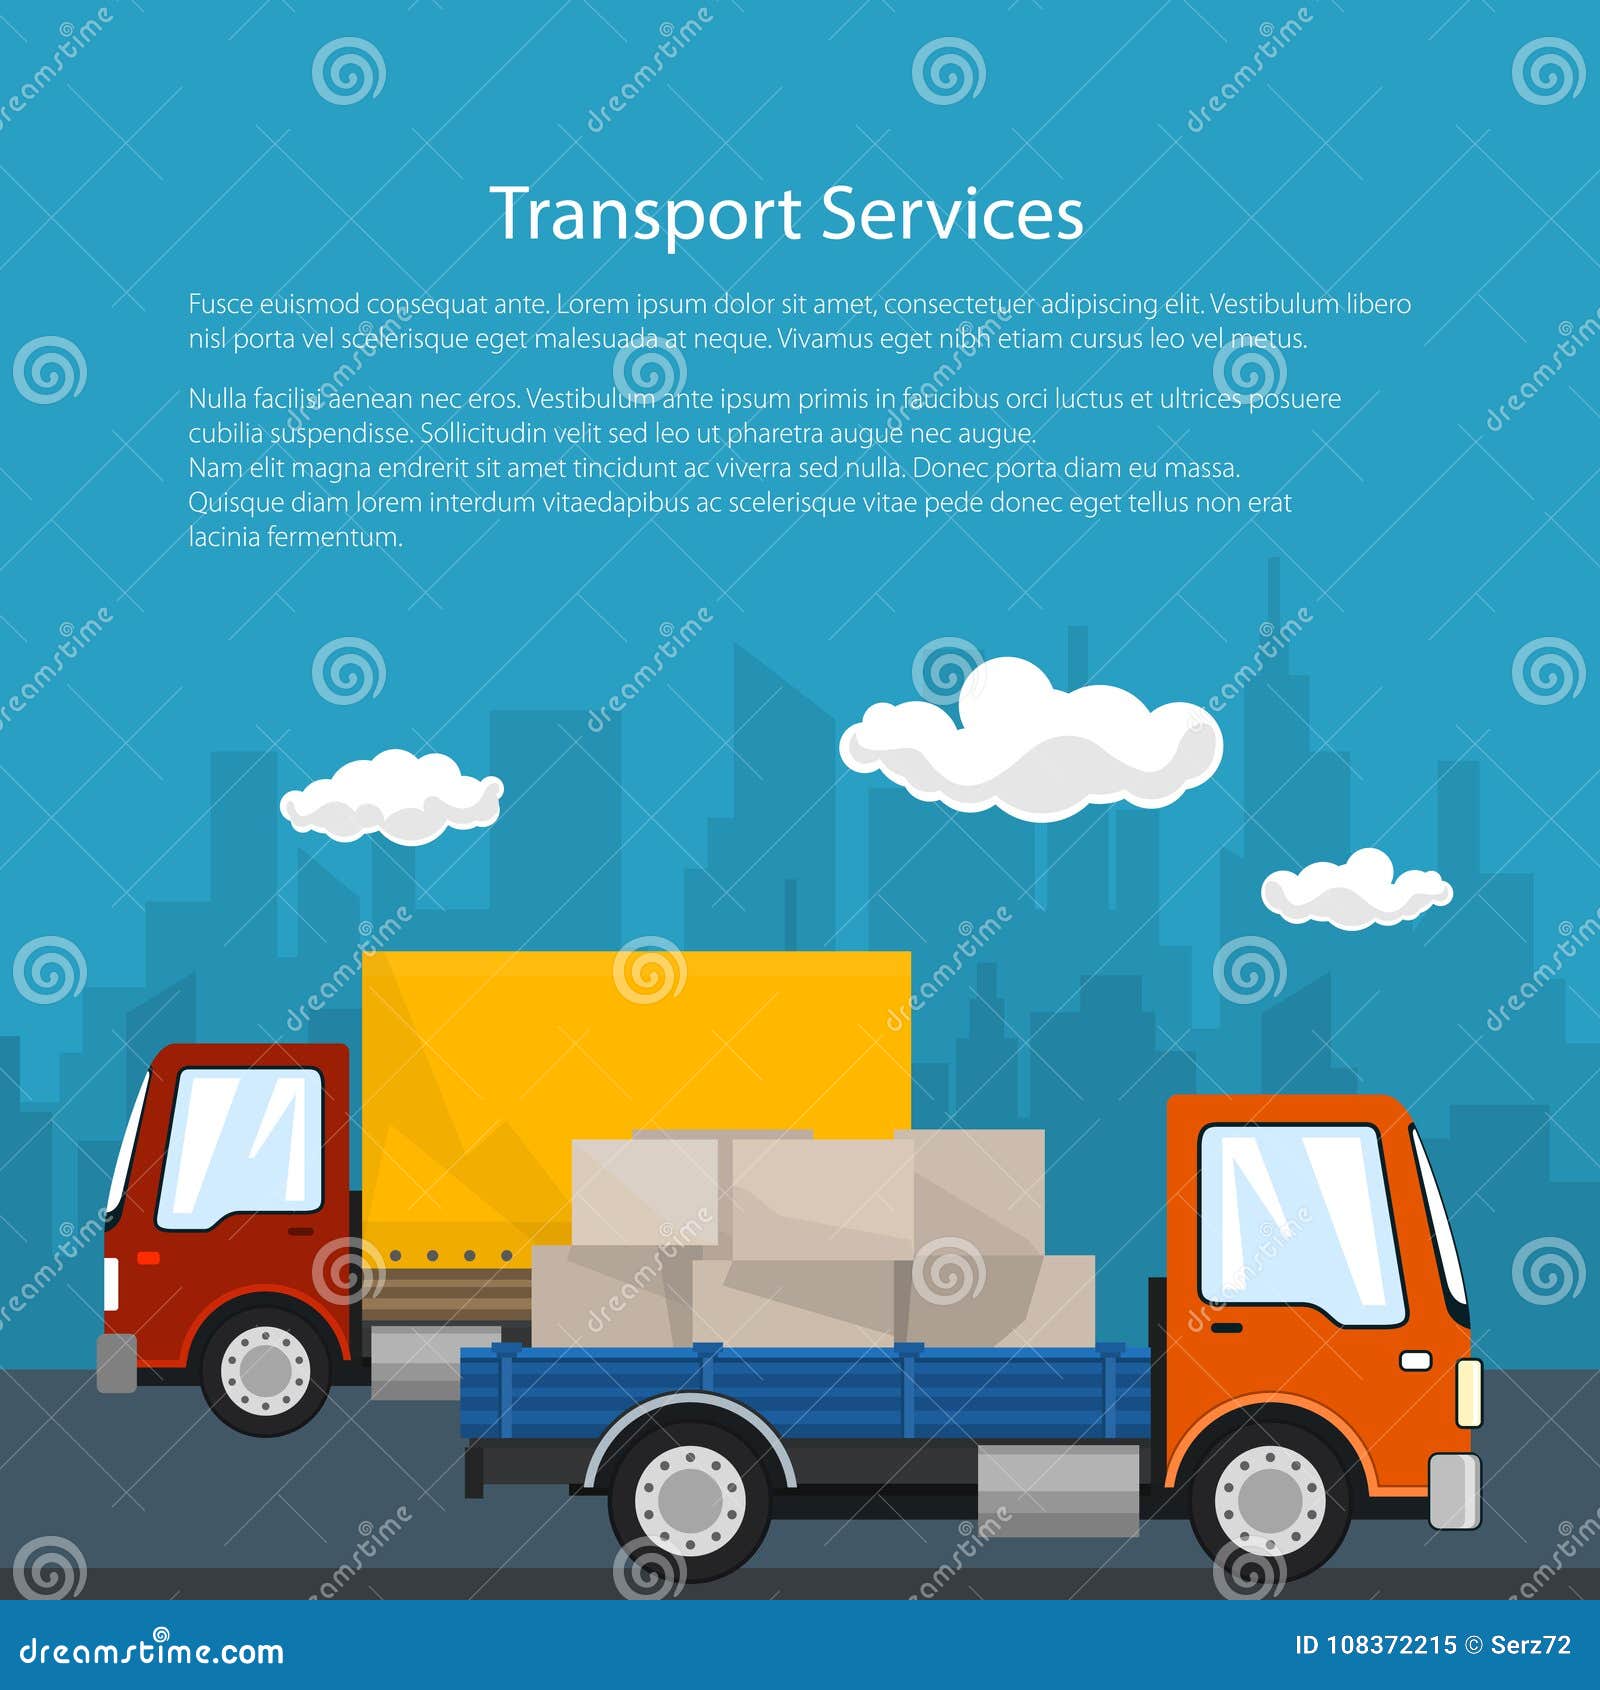 Poster Transport and Logistics Stock Vector - Illustration of cargo, commerce: 108372215